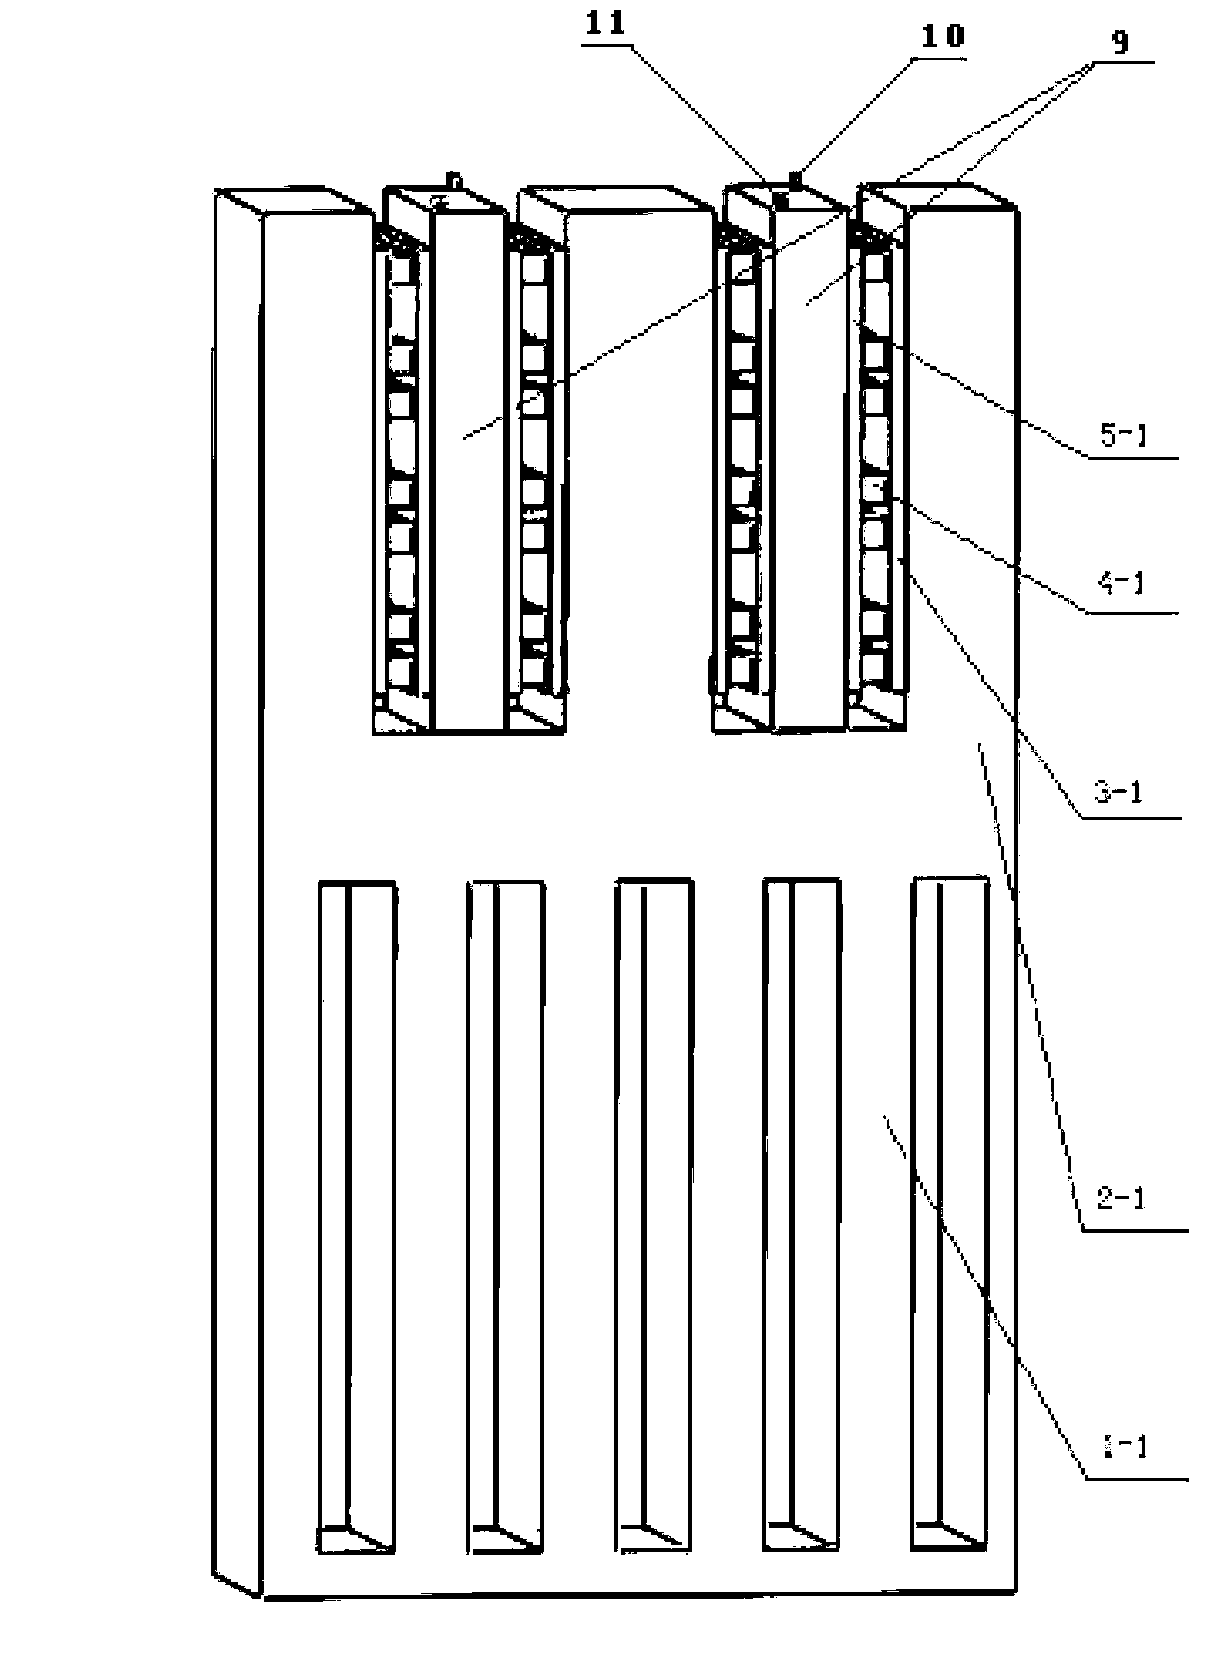 Semiconductor temperature difference power generation system